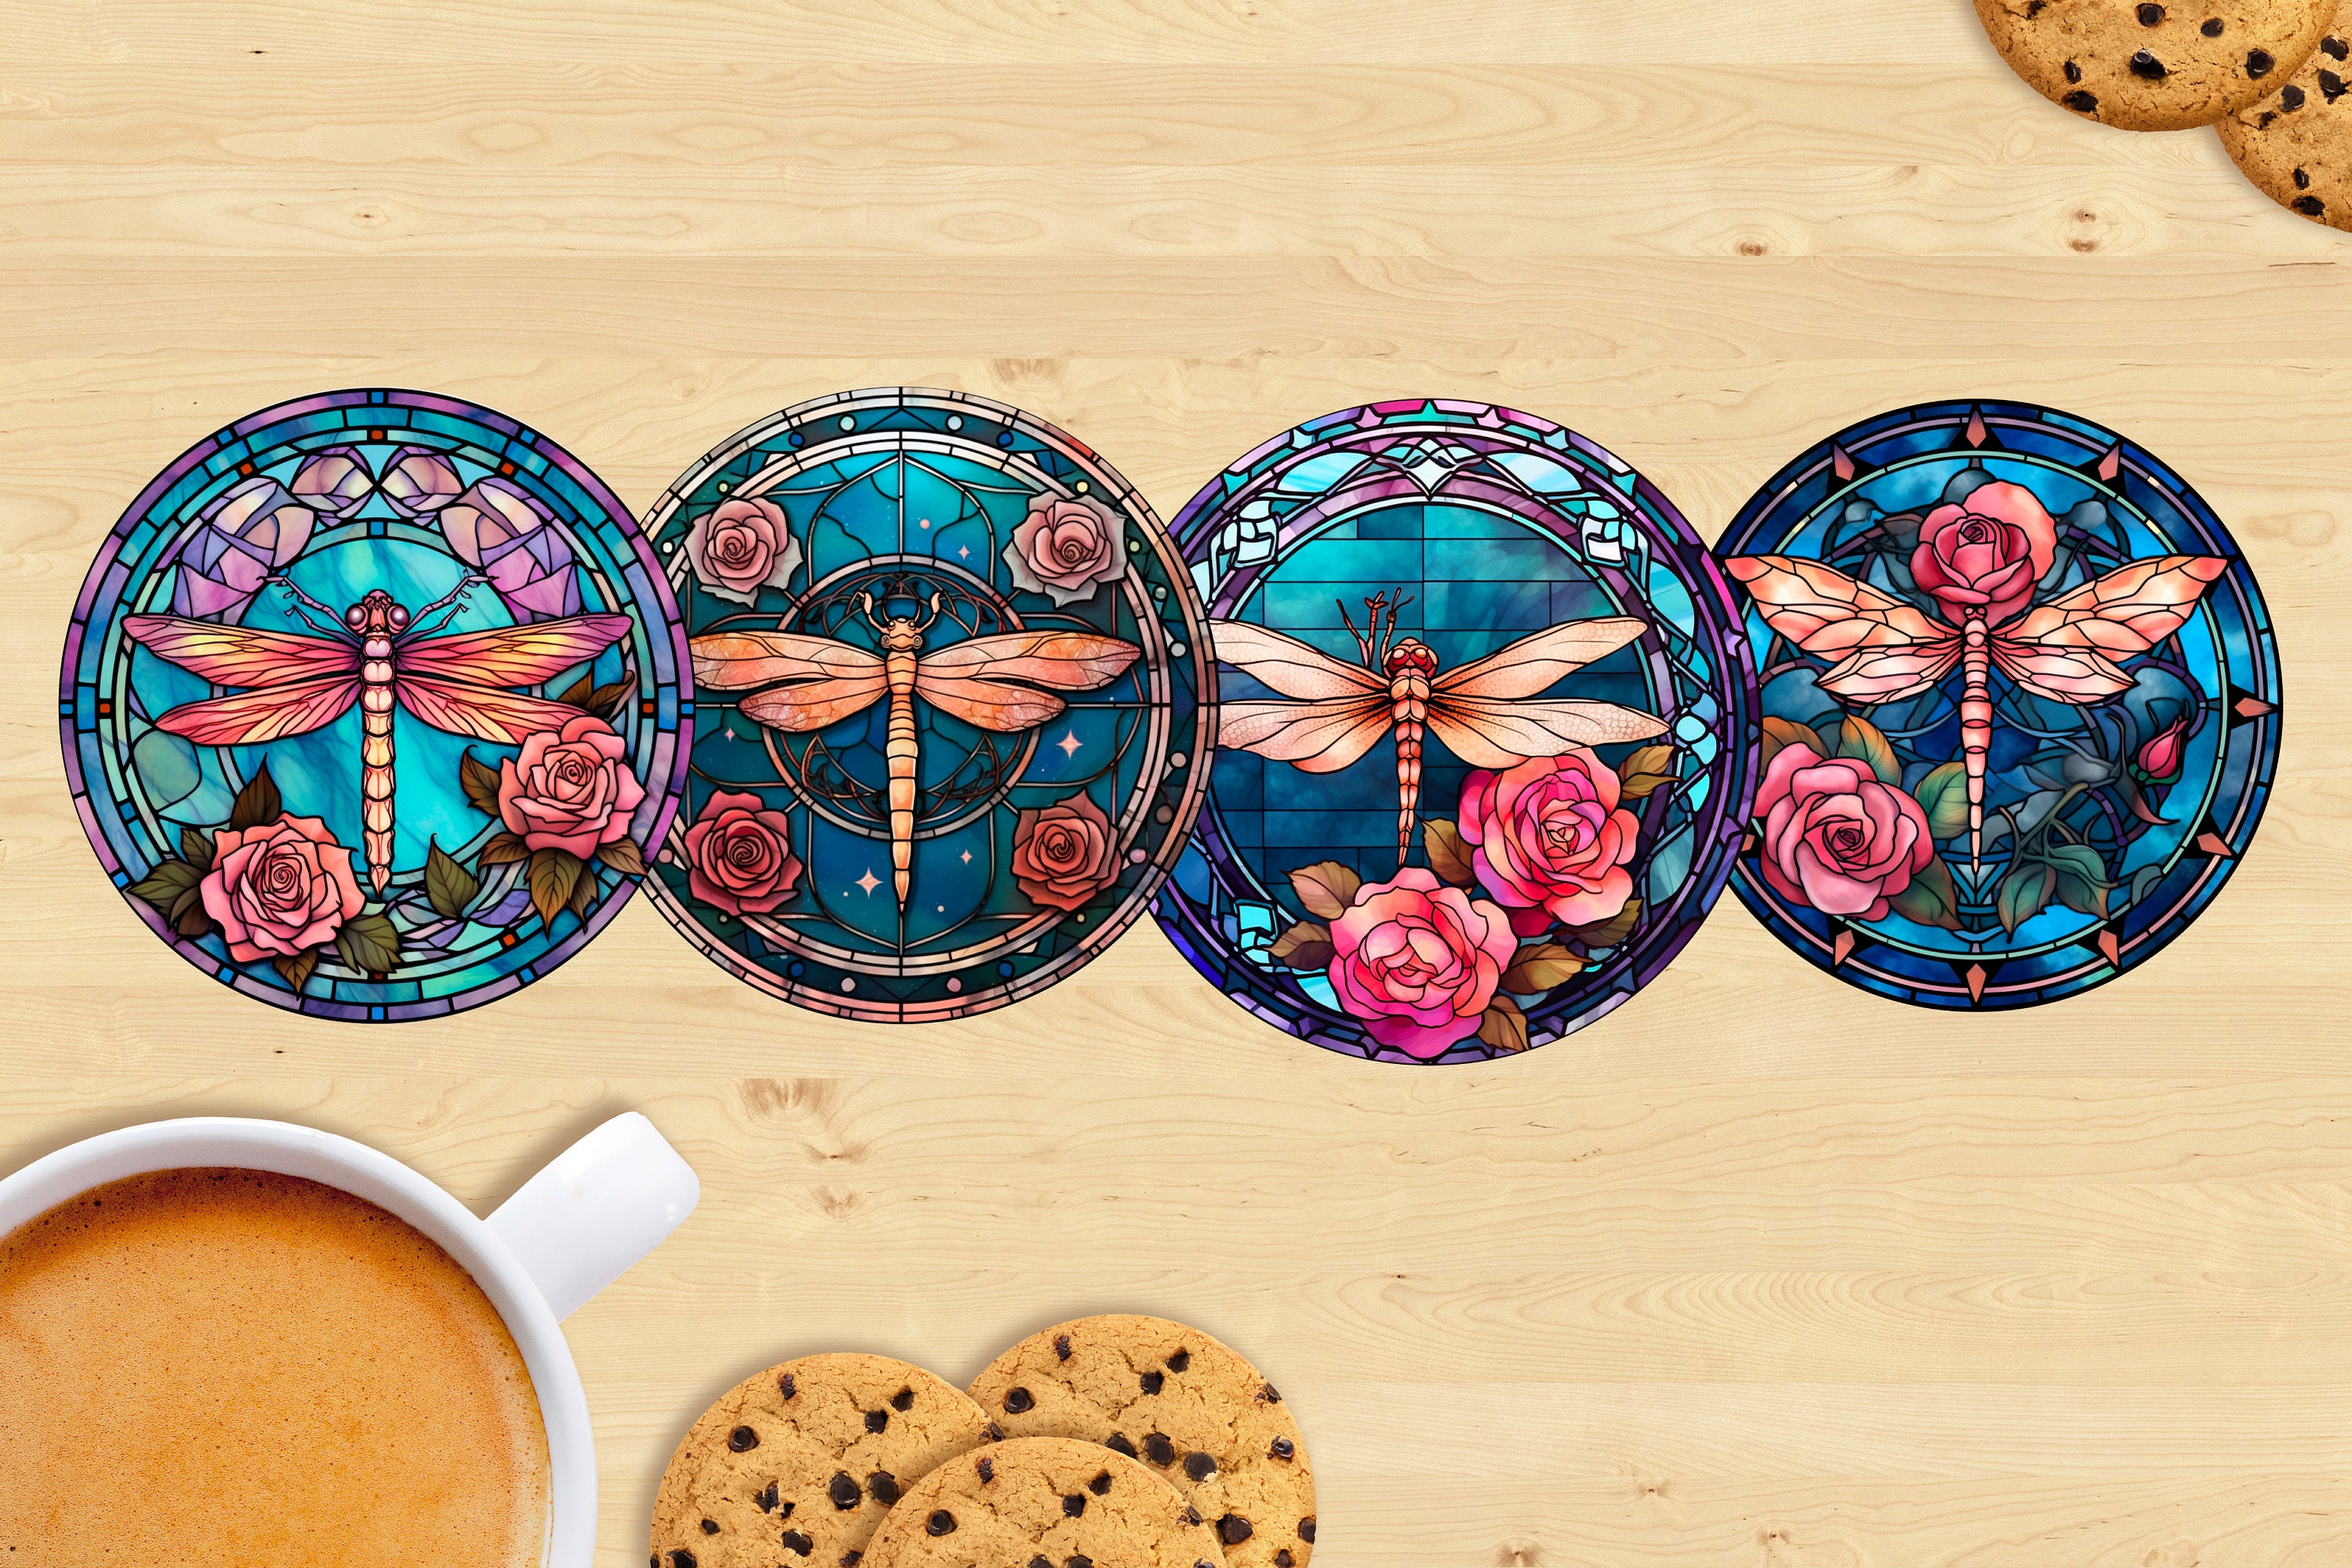 Dragonfly Ceramic Coaster, Stained Glass Style - Sublimation Printed,  Unique Design